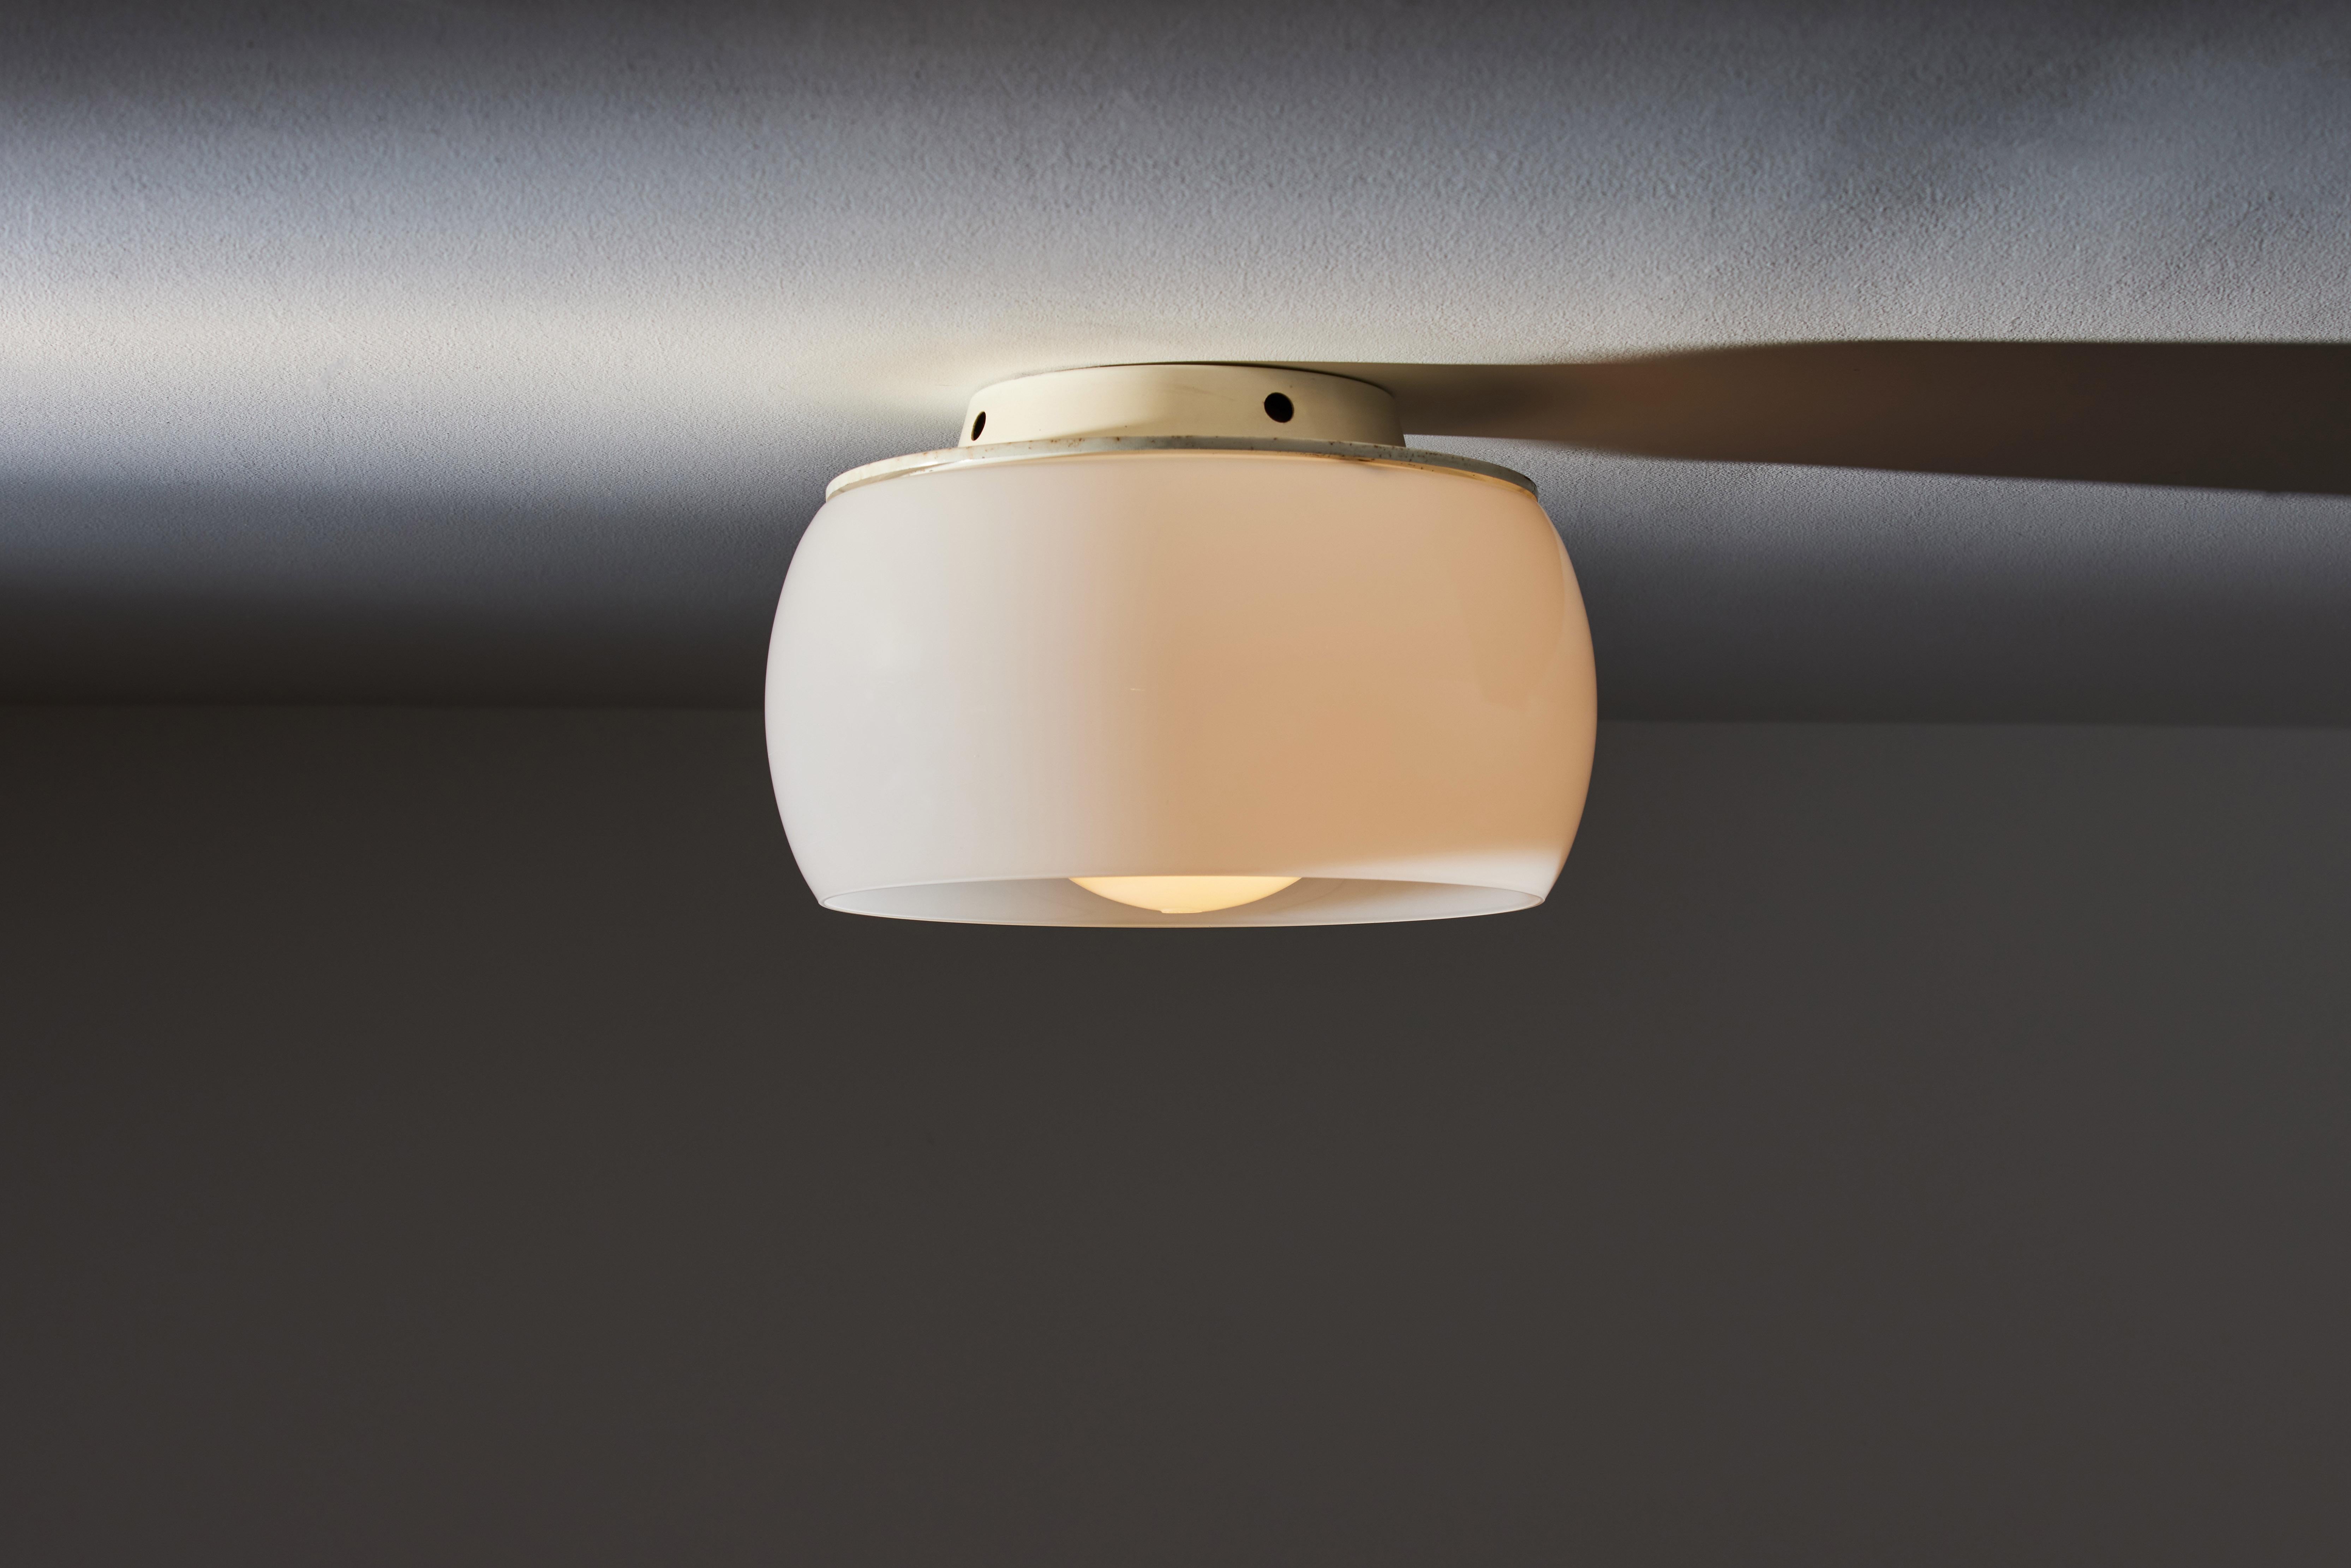 Clinio Flush Mount Ceiling Light by Vico Magistretti for Artemide. Designed and manufactured in Italy circa 1960's. Opaline glass diffusers .Enameled metal frame. Rewired for U.S. standards. We recommend one E27 100w maximum bulb per fixture. Bulbs